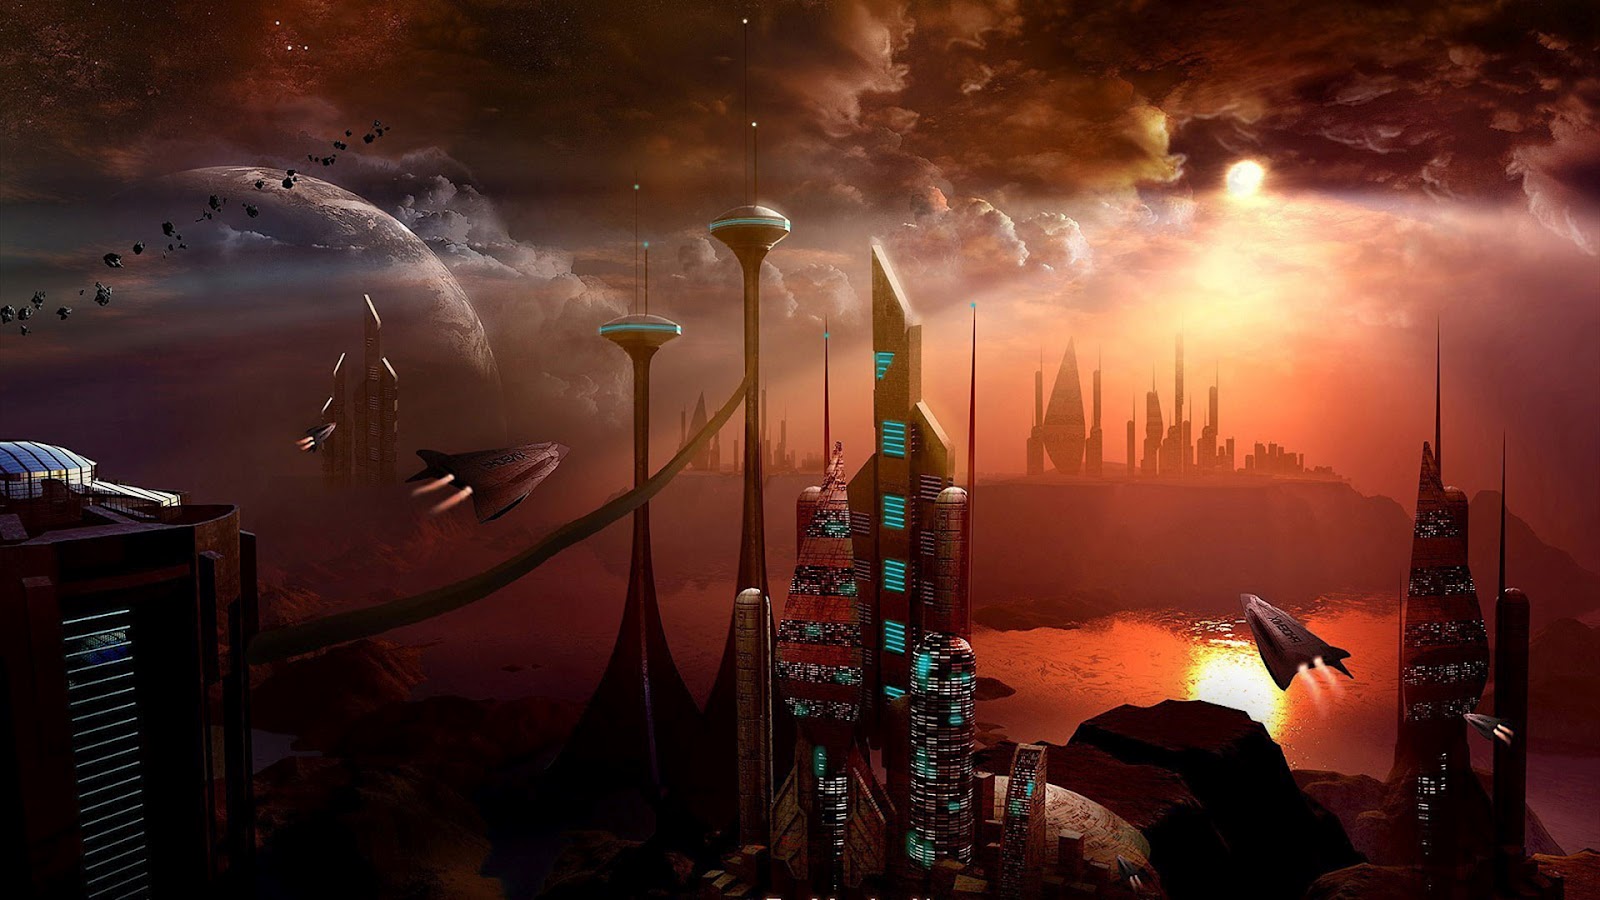 digital art wallpaper,pc game,city,space,strategy video game,atmosphere